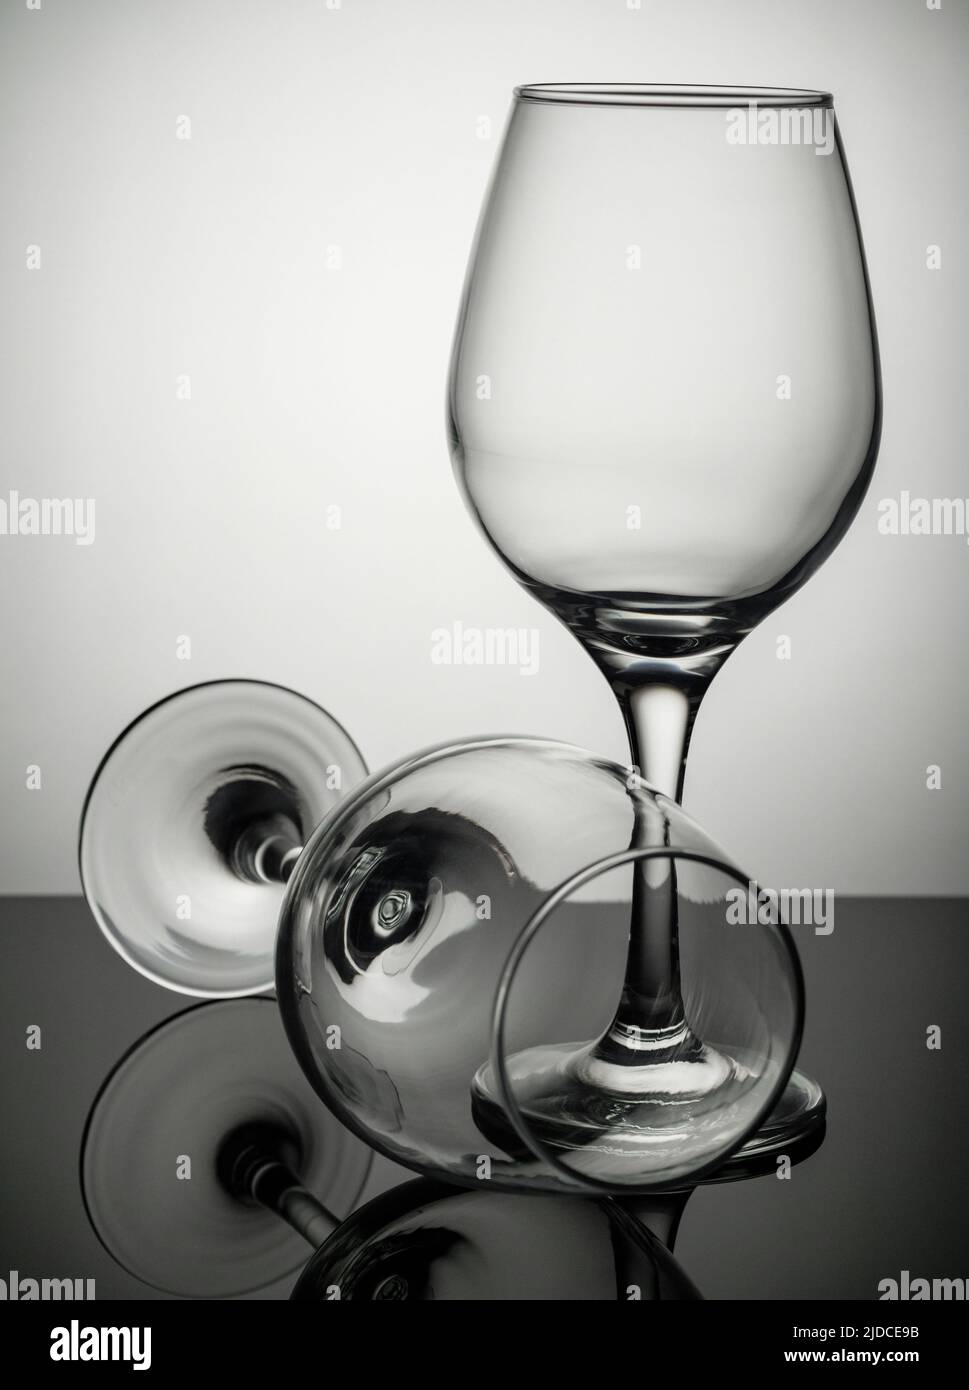 Two wine glasses standing on a grey surface Stock Photo